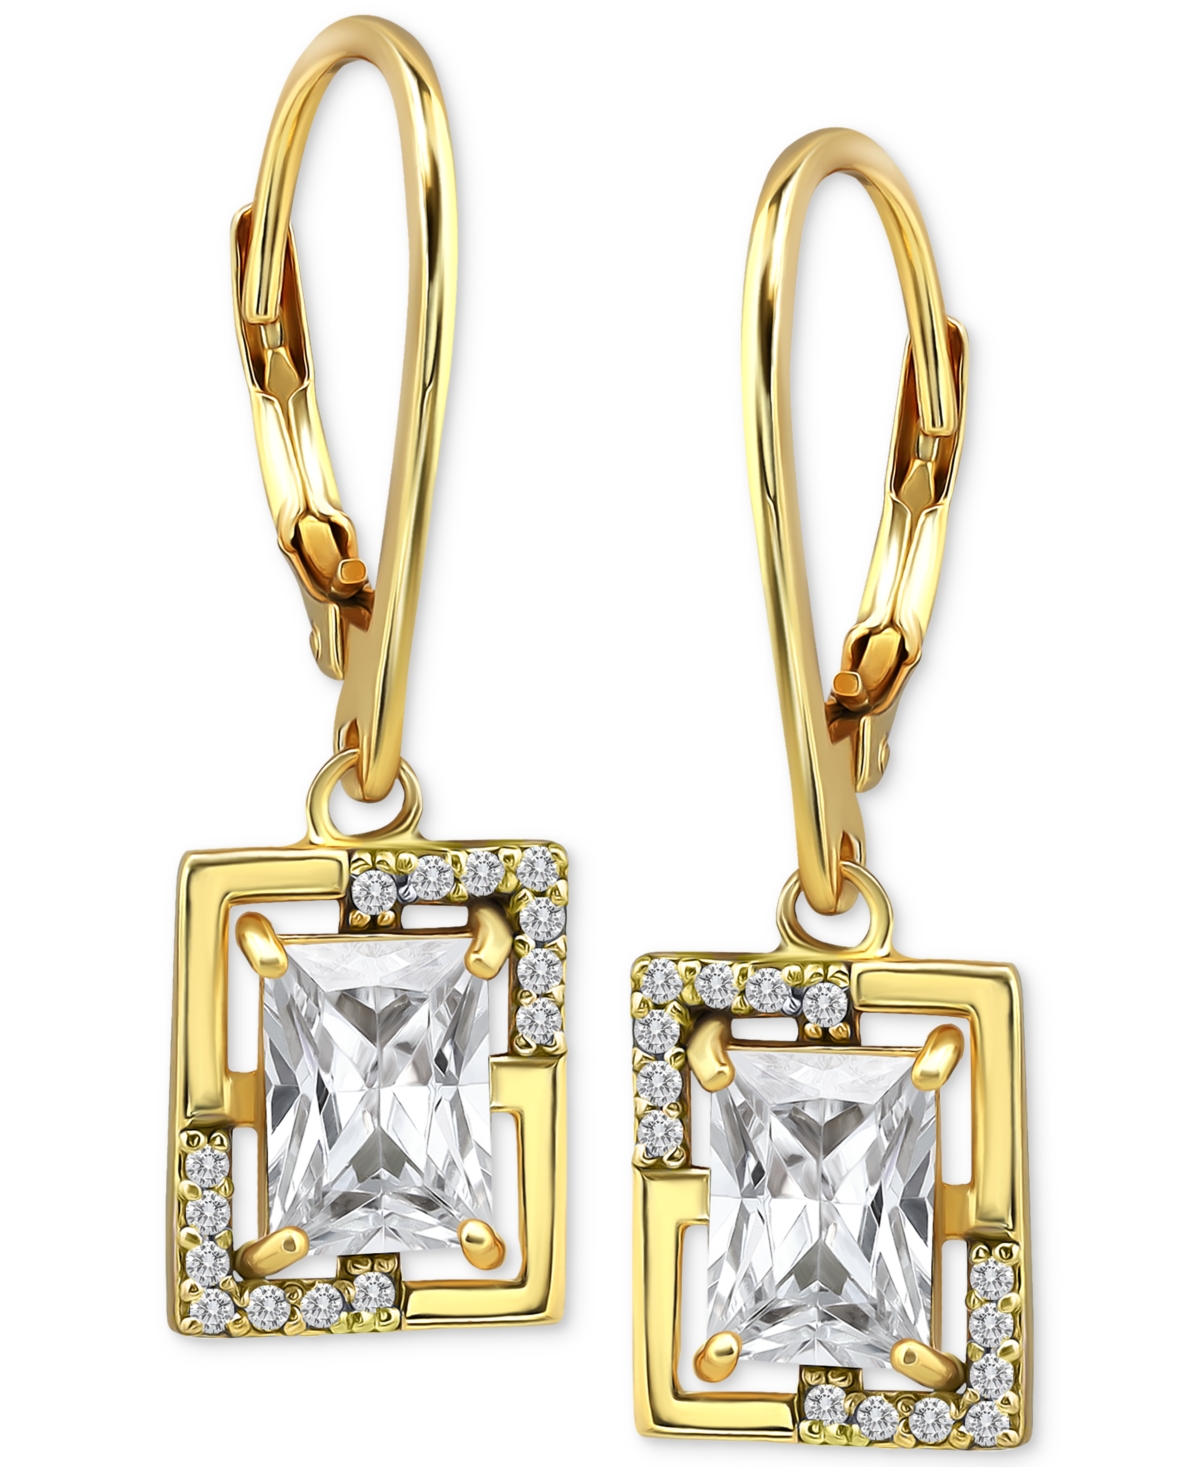 Giani Bernini Cubic Zirconia Square Framed Leverback Drop Earrings In 18k Gold-plated Sterling Silver, Created For